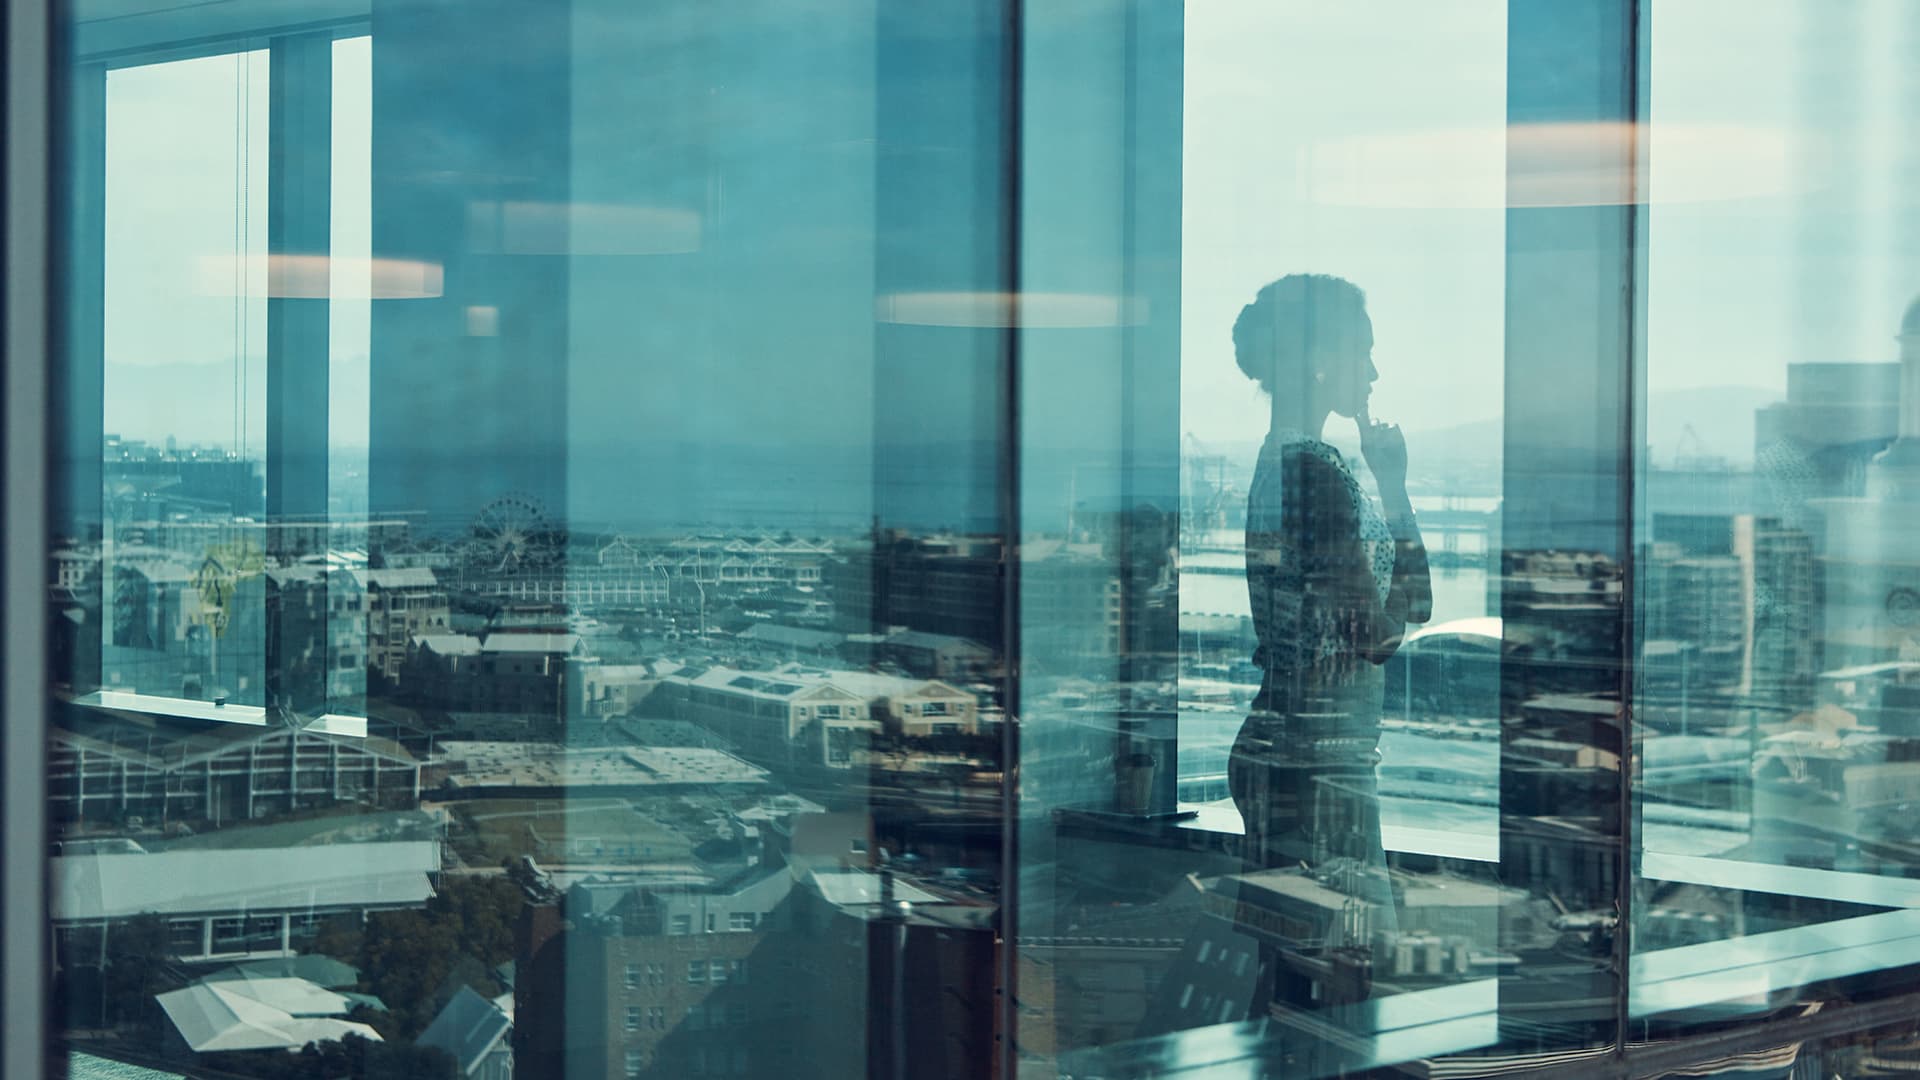 Businesswoman standing inside a glass building with a reflection of the city in the background.